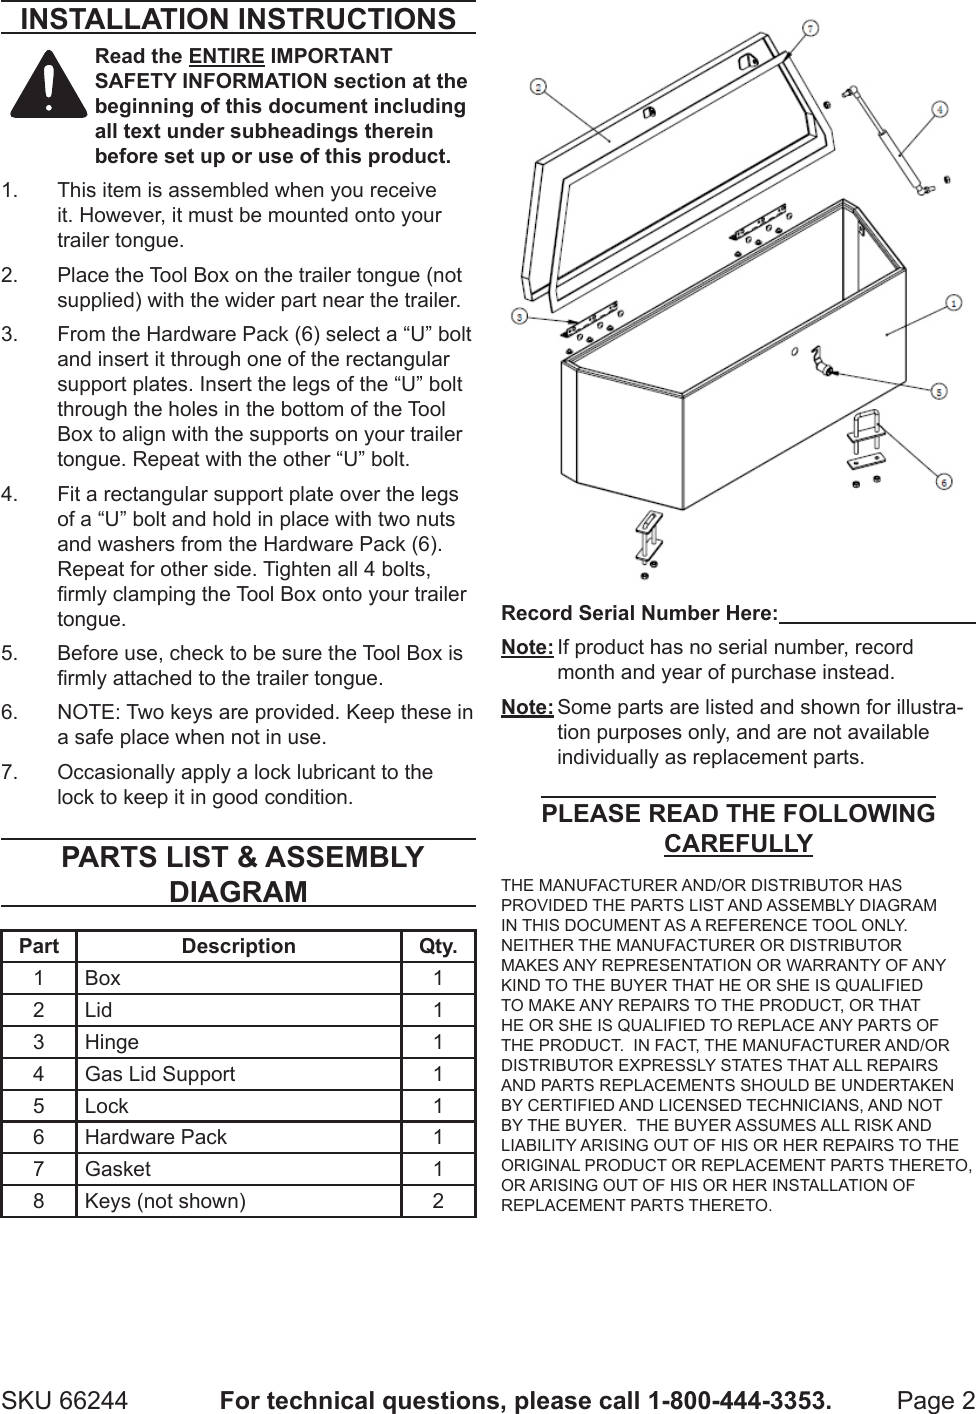 Page 2 of 3 - Harbor-Freight Harbor-Freight-2-1-4-Cu-Ft-Steel-Trailer-Tongue-Box-Product-Manual-  Harbor-freight-2-1-4-cu-ft-steel-trailer-tongue-box-product-manual